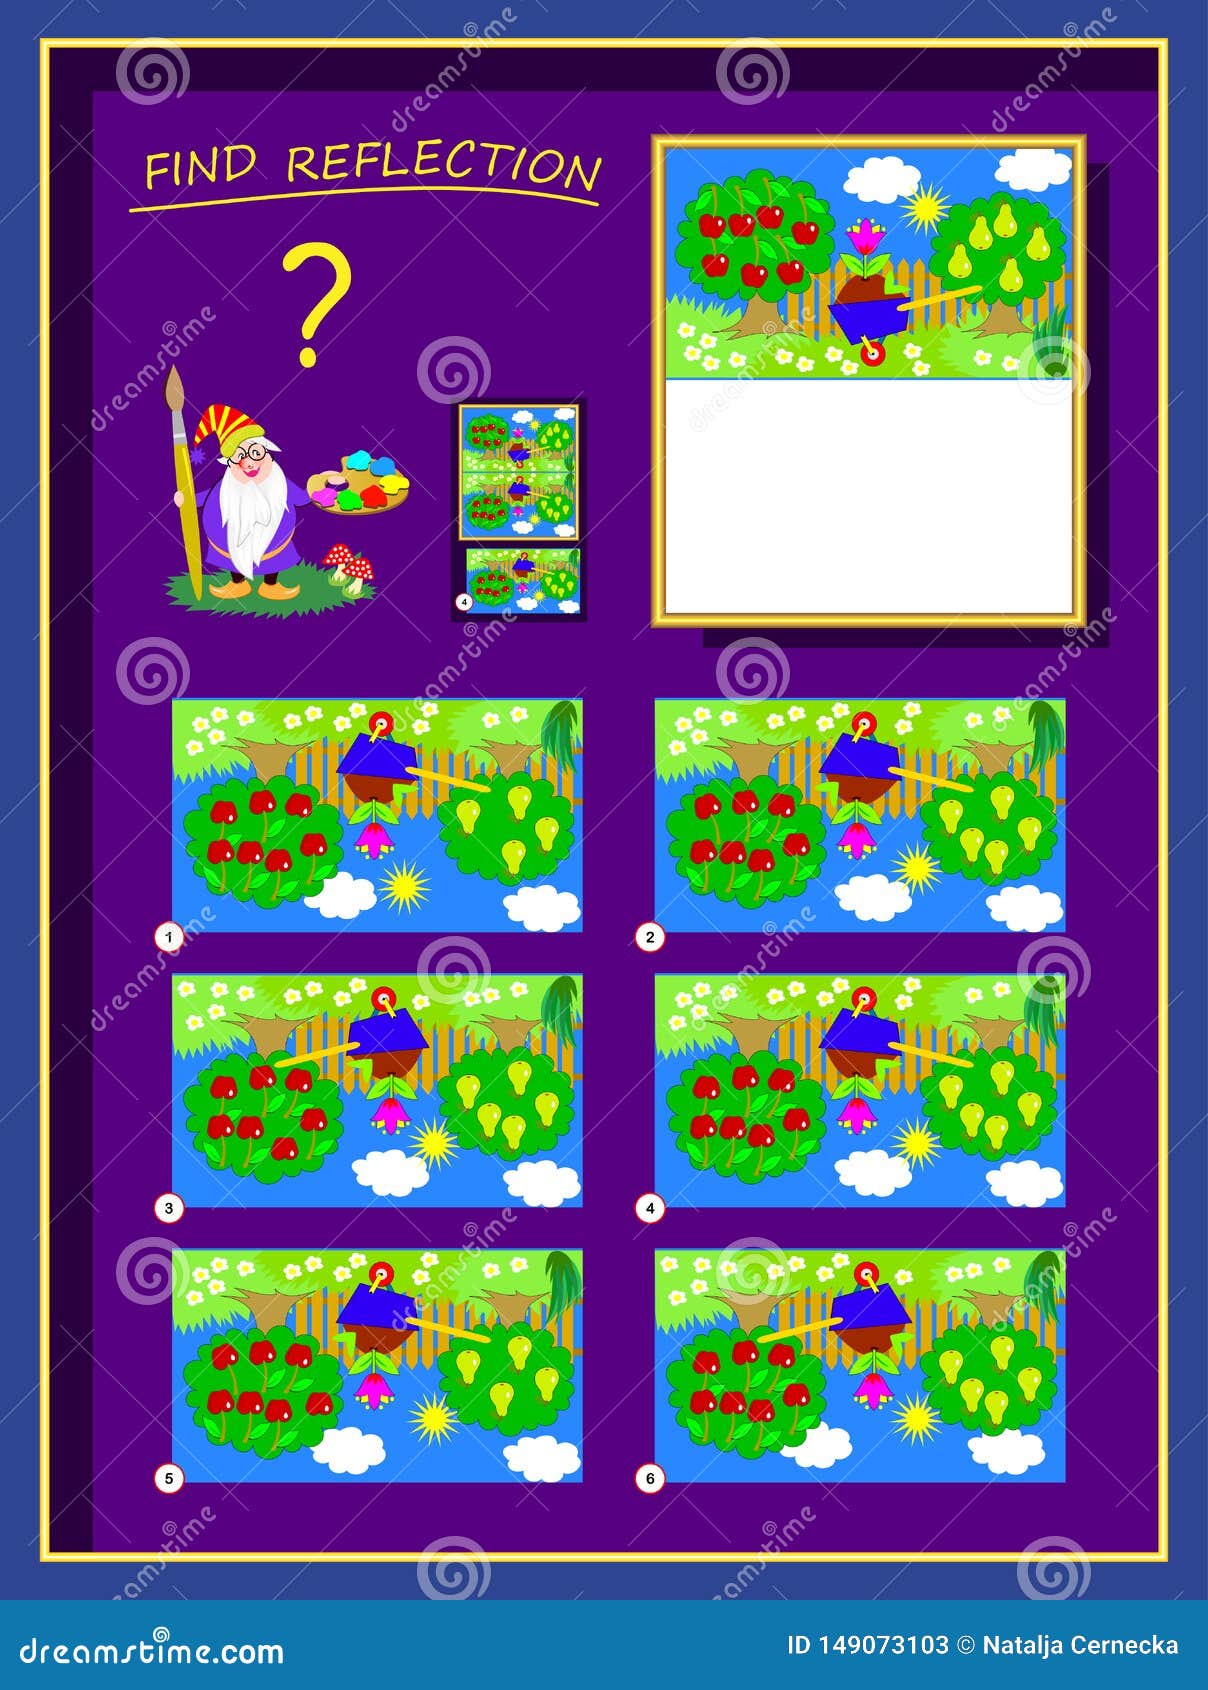 logic puzzle game for smartest. help the artist finish the picture, find correct reflection and draw it.